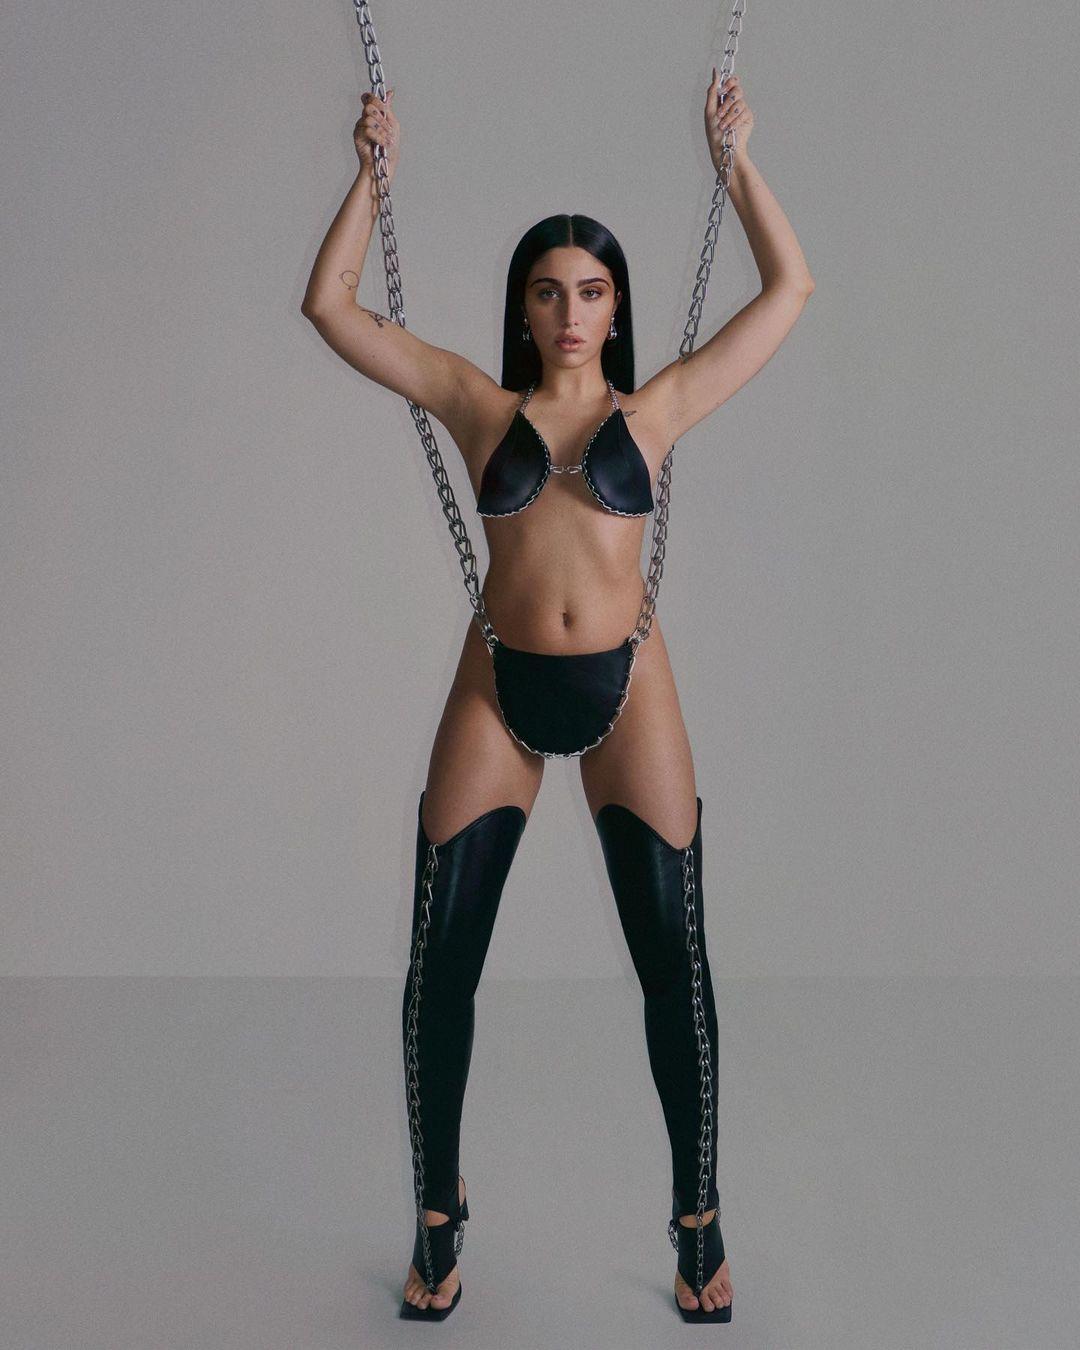 Lourdes Leon wearing nothing but black leather bags.